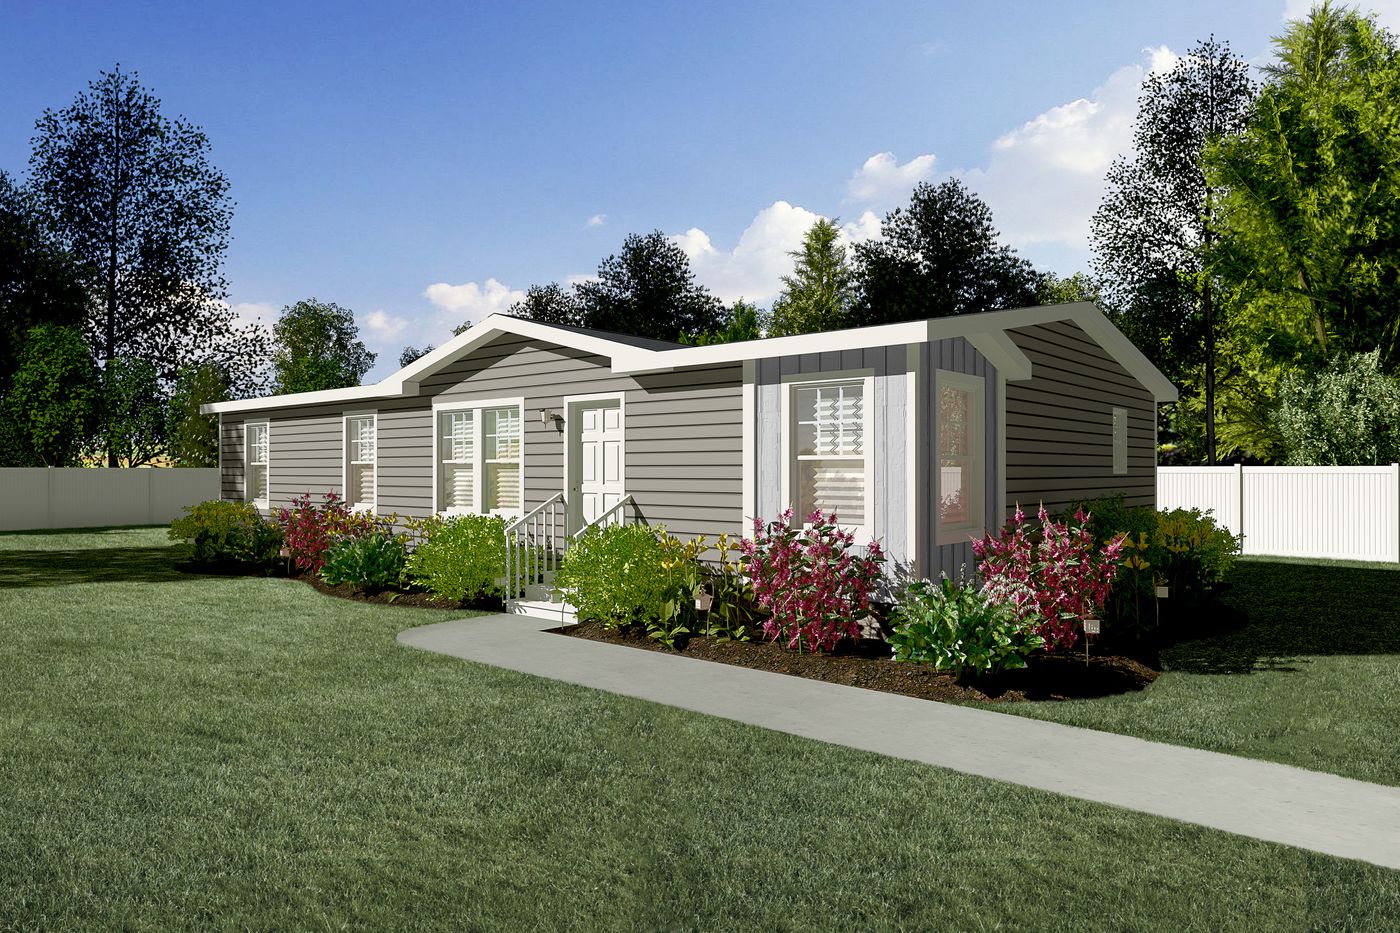 The MEADOW RD 5228-MS016 SECT Exterior. This Manufactured Mobile Home features 3 bedrooms and 2 baths.